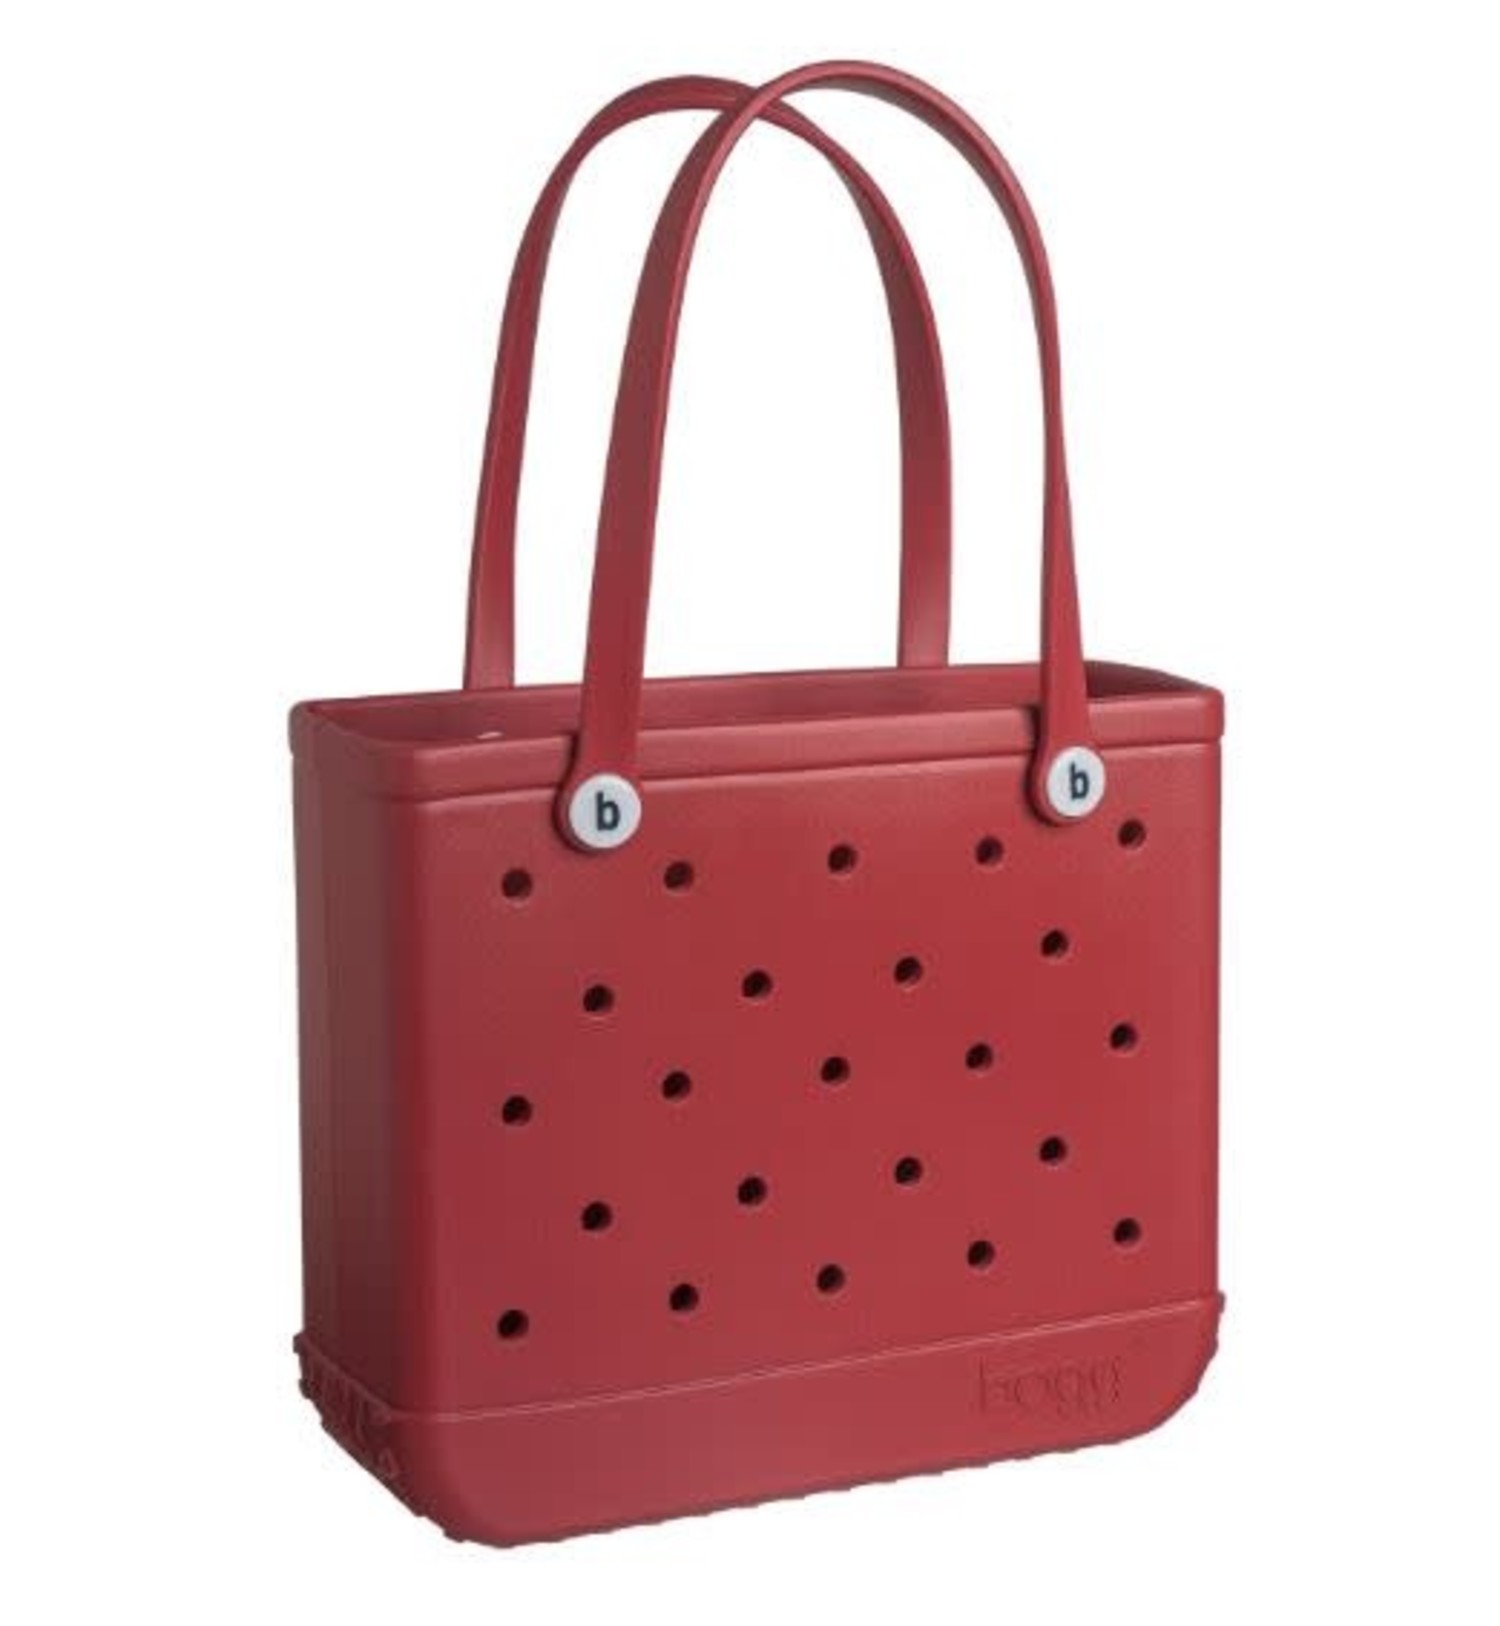 Marcie n Me - We have Bogg Bag Accessories now in stock.